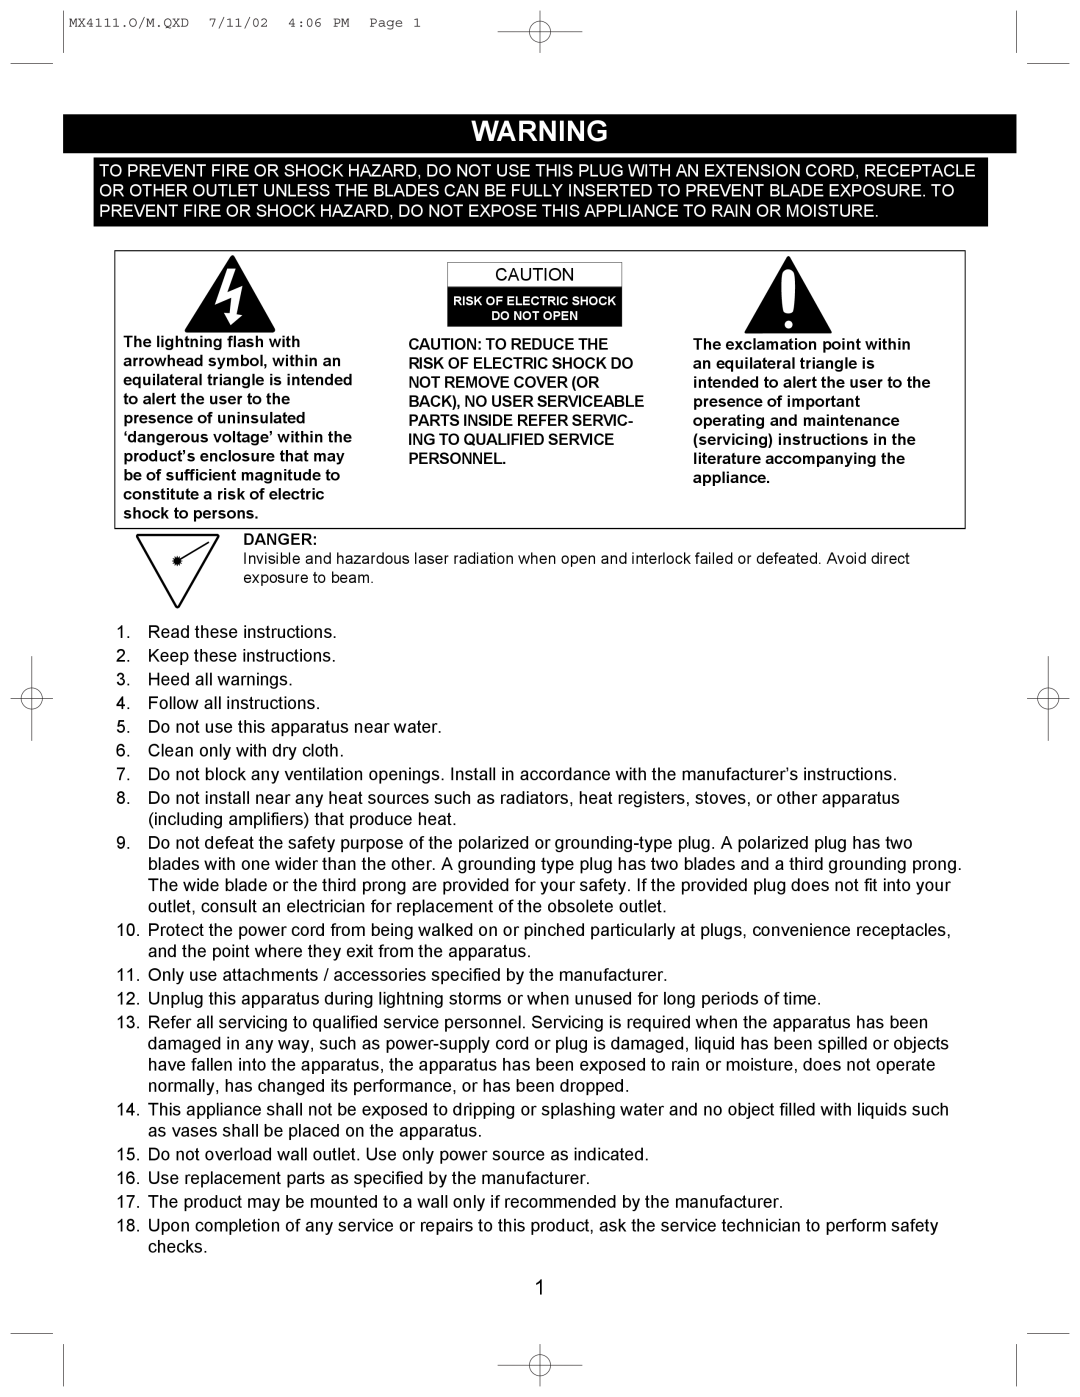 Memorex MX4111 operating instructions Read these instructions 